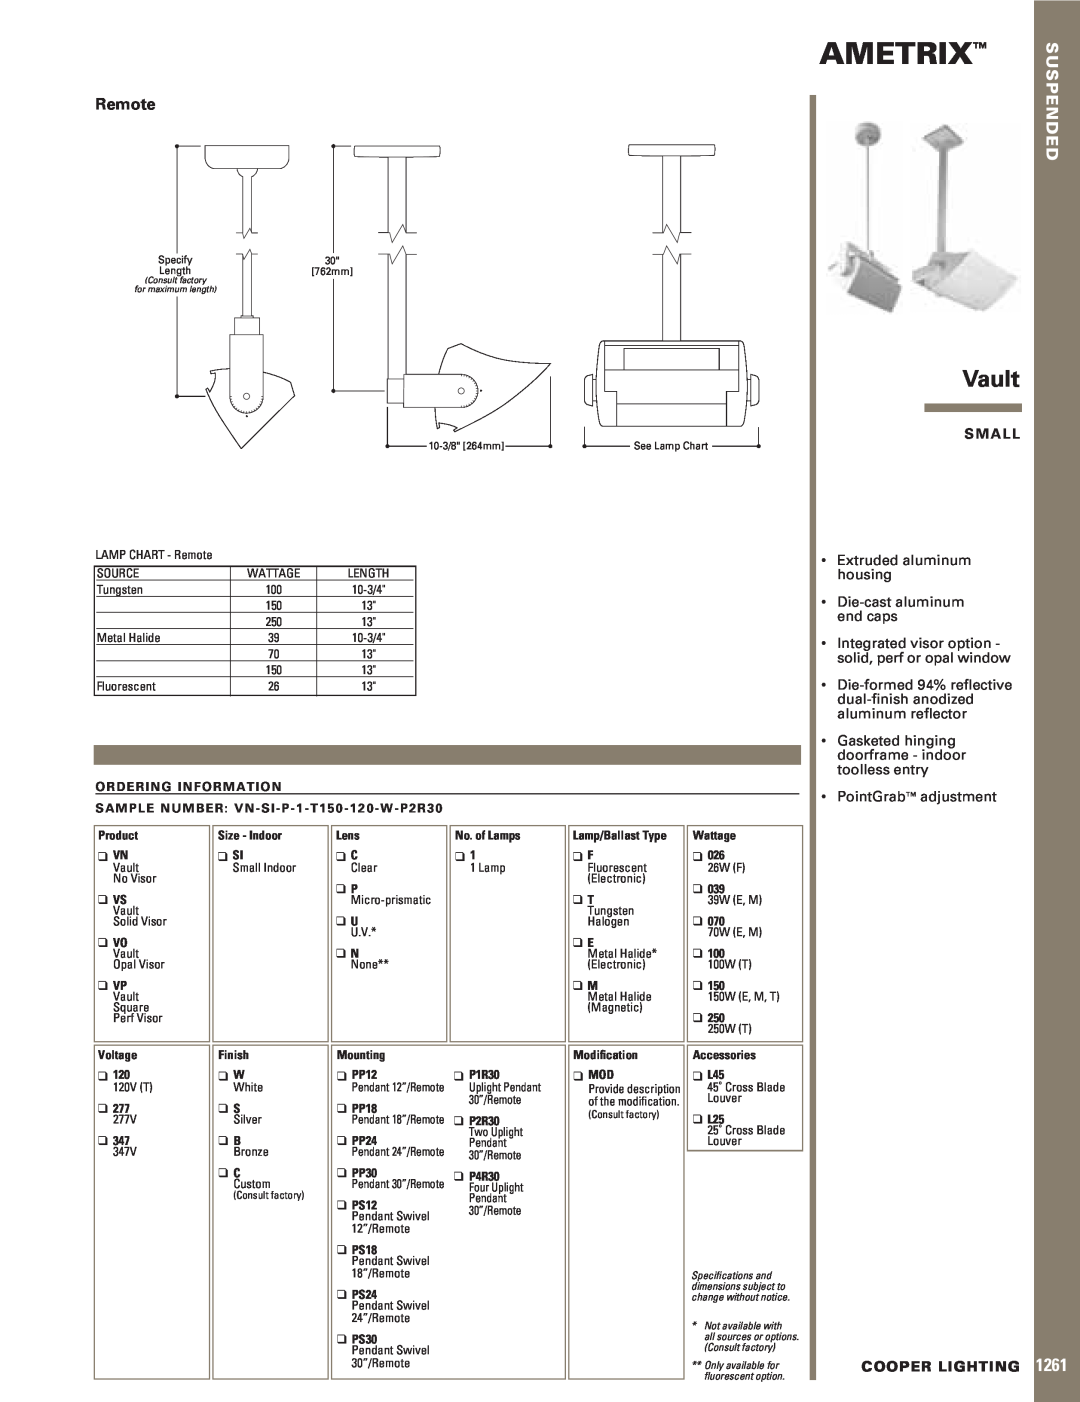 Cooper Lighting 1261 specifications Ametrix, Vault, Remote, Suspended, S M A L L, Extruded aluminum housing 